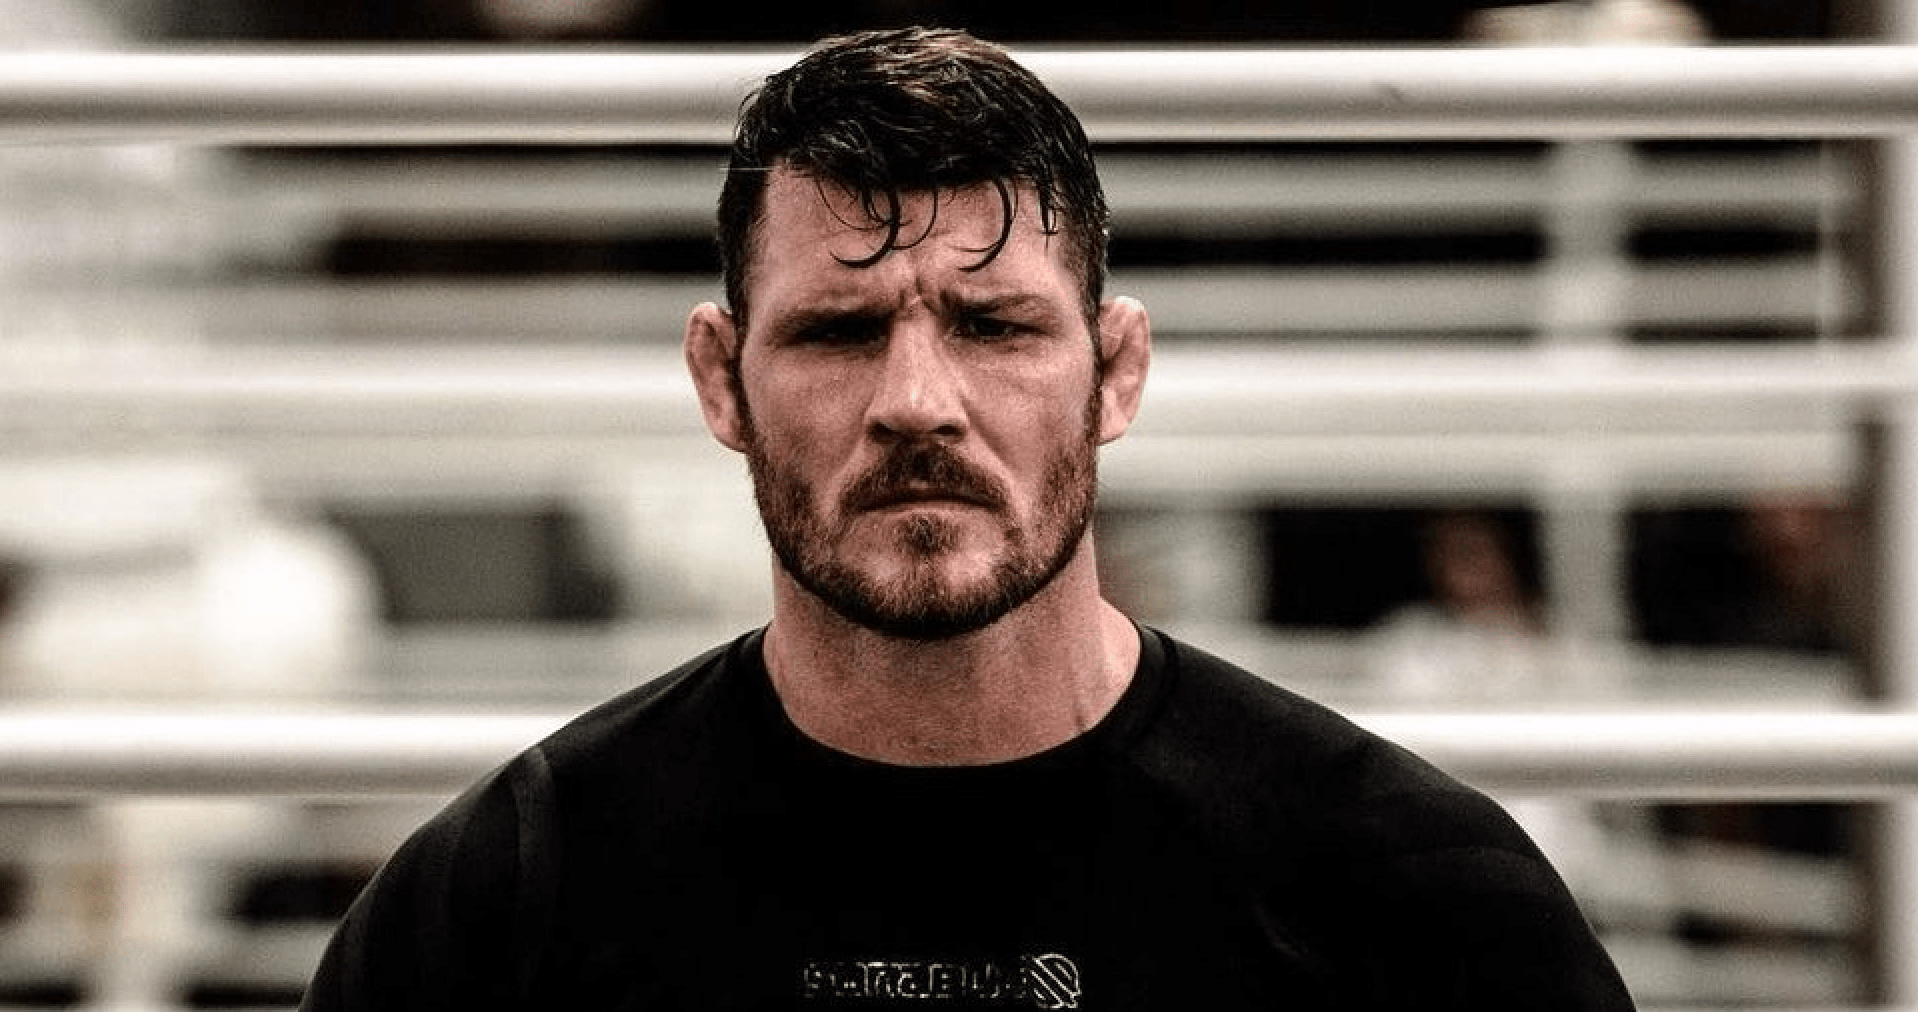 Michael Bisping Calls For Accountability For Bad MMA Judging